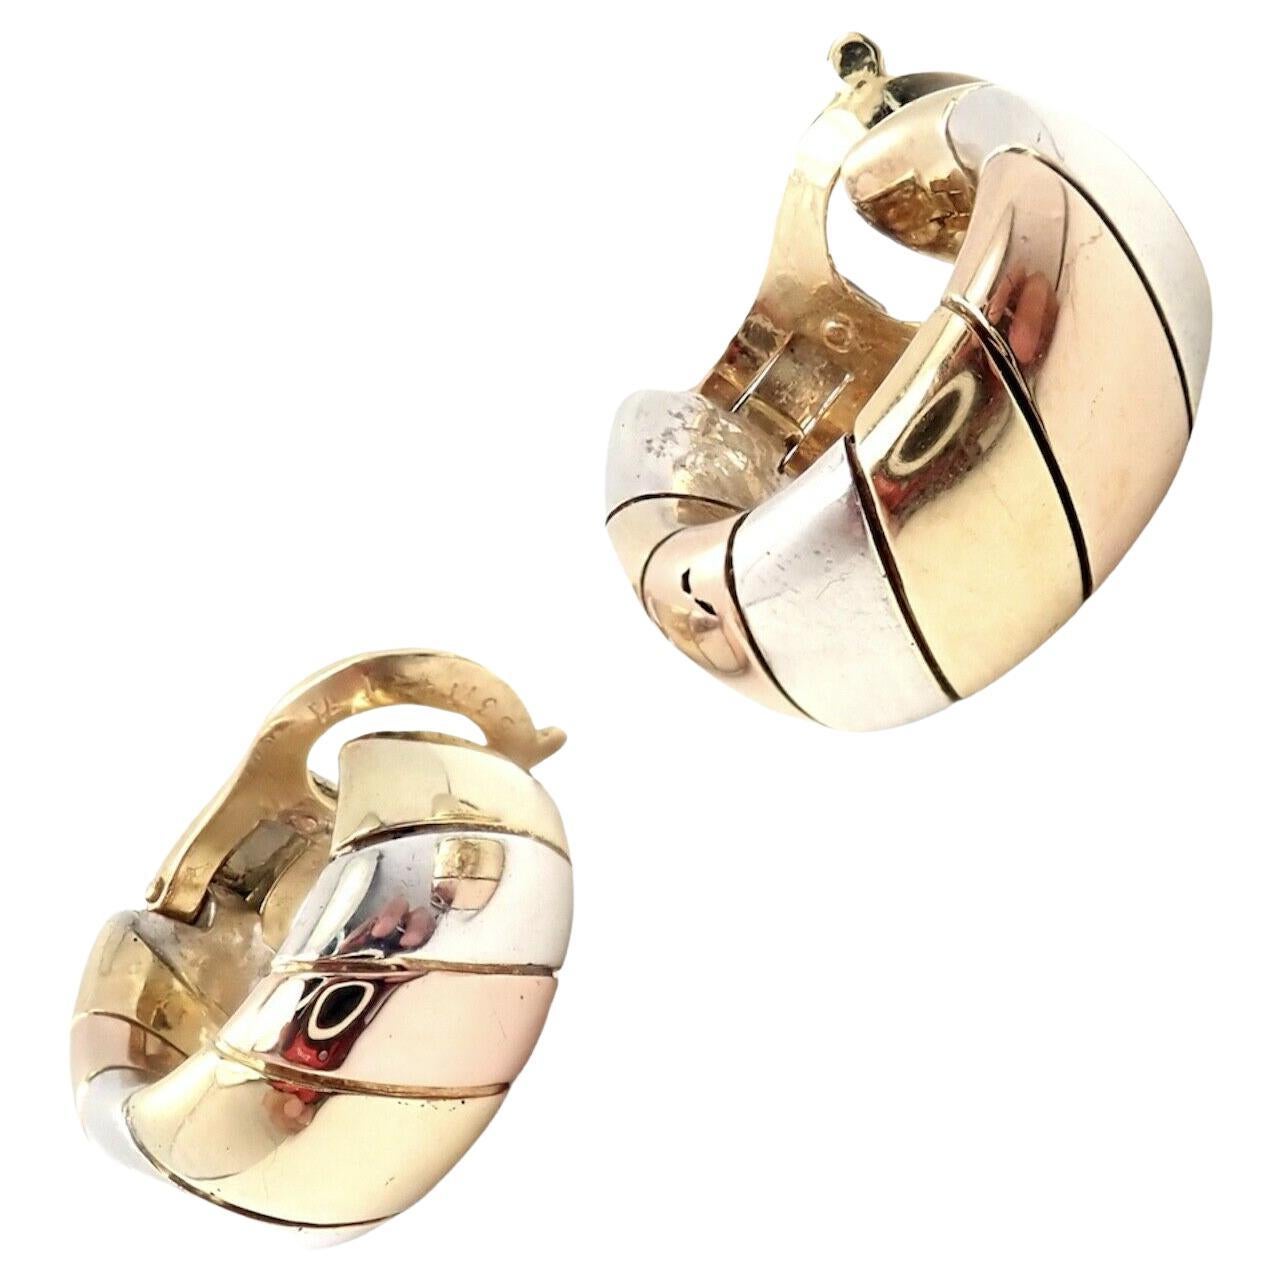 18k Multicolor Gold And White Sterling Silver Hoop Earrings by Van Cleef & Arpels. Circa 1978.
Details:
Weight: 20.8 grams
Measurements: 8mm x 18.5mm
Stamped Hallmarks: 
925 (French Assay Mark) - VCA (c) 78 <- From 1978 - C (serial omitted) -